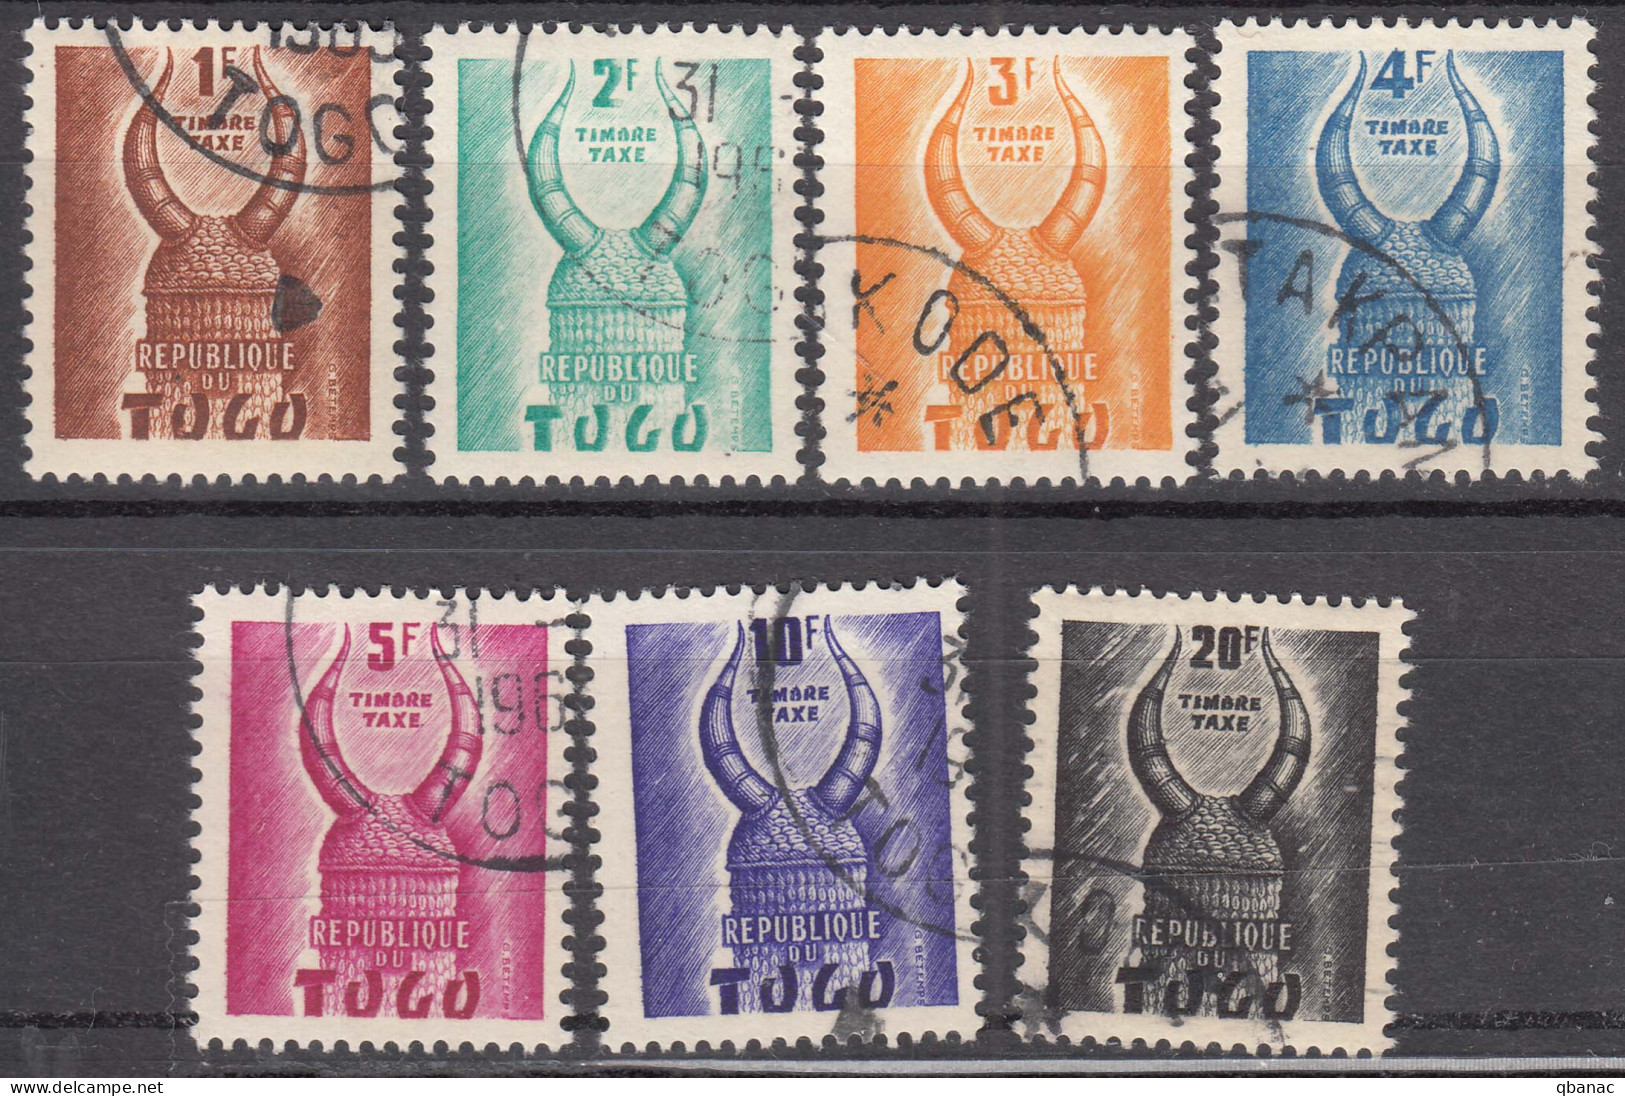 Togo 1959 Timbre Taxe Mi#55-61 Used - Gebraucht